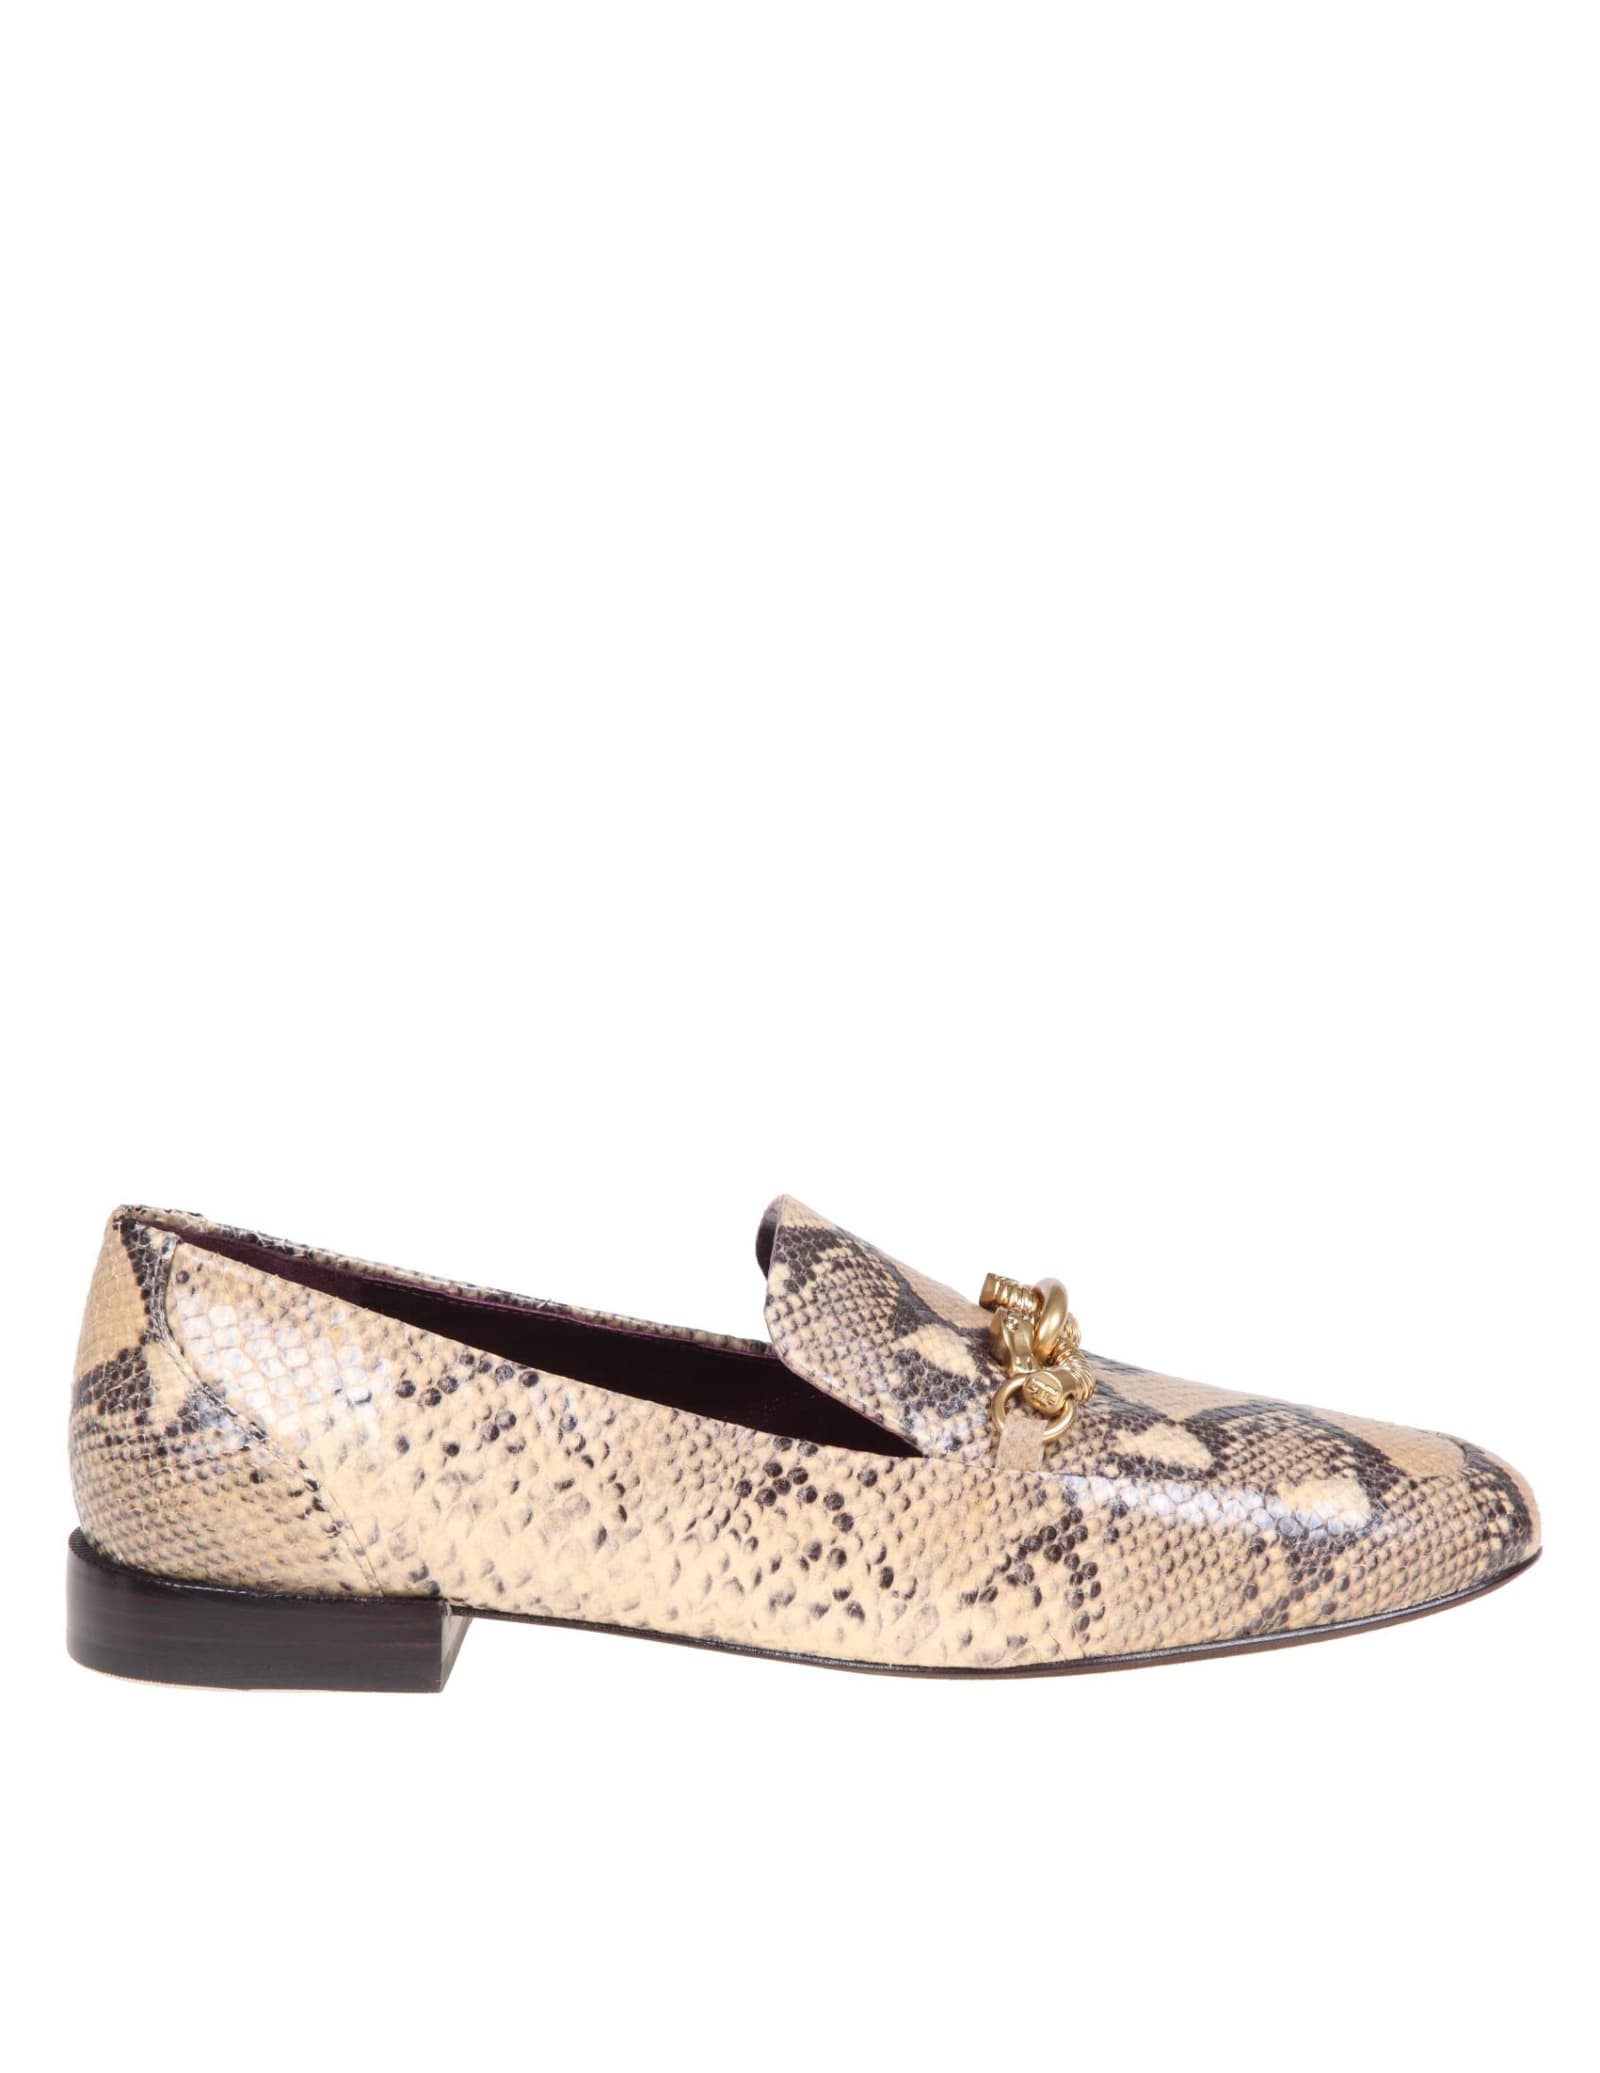 TORY BURCH PYTHON PRINT LEATHER LOAFERS